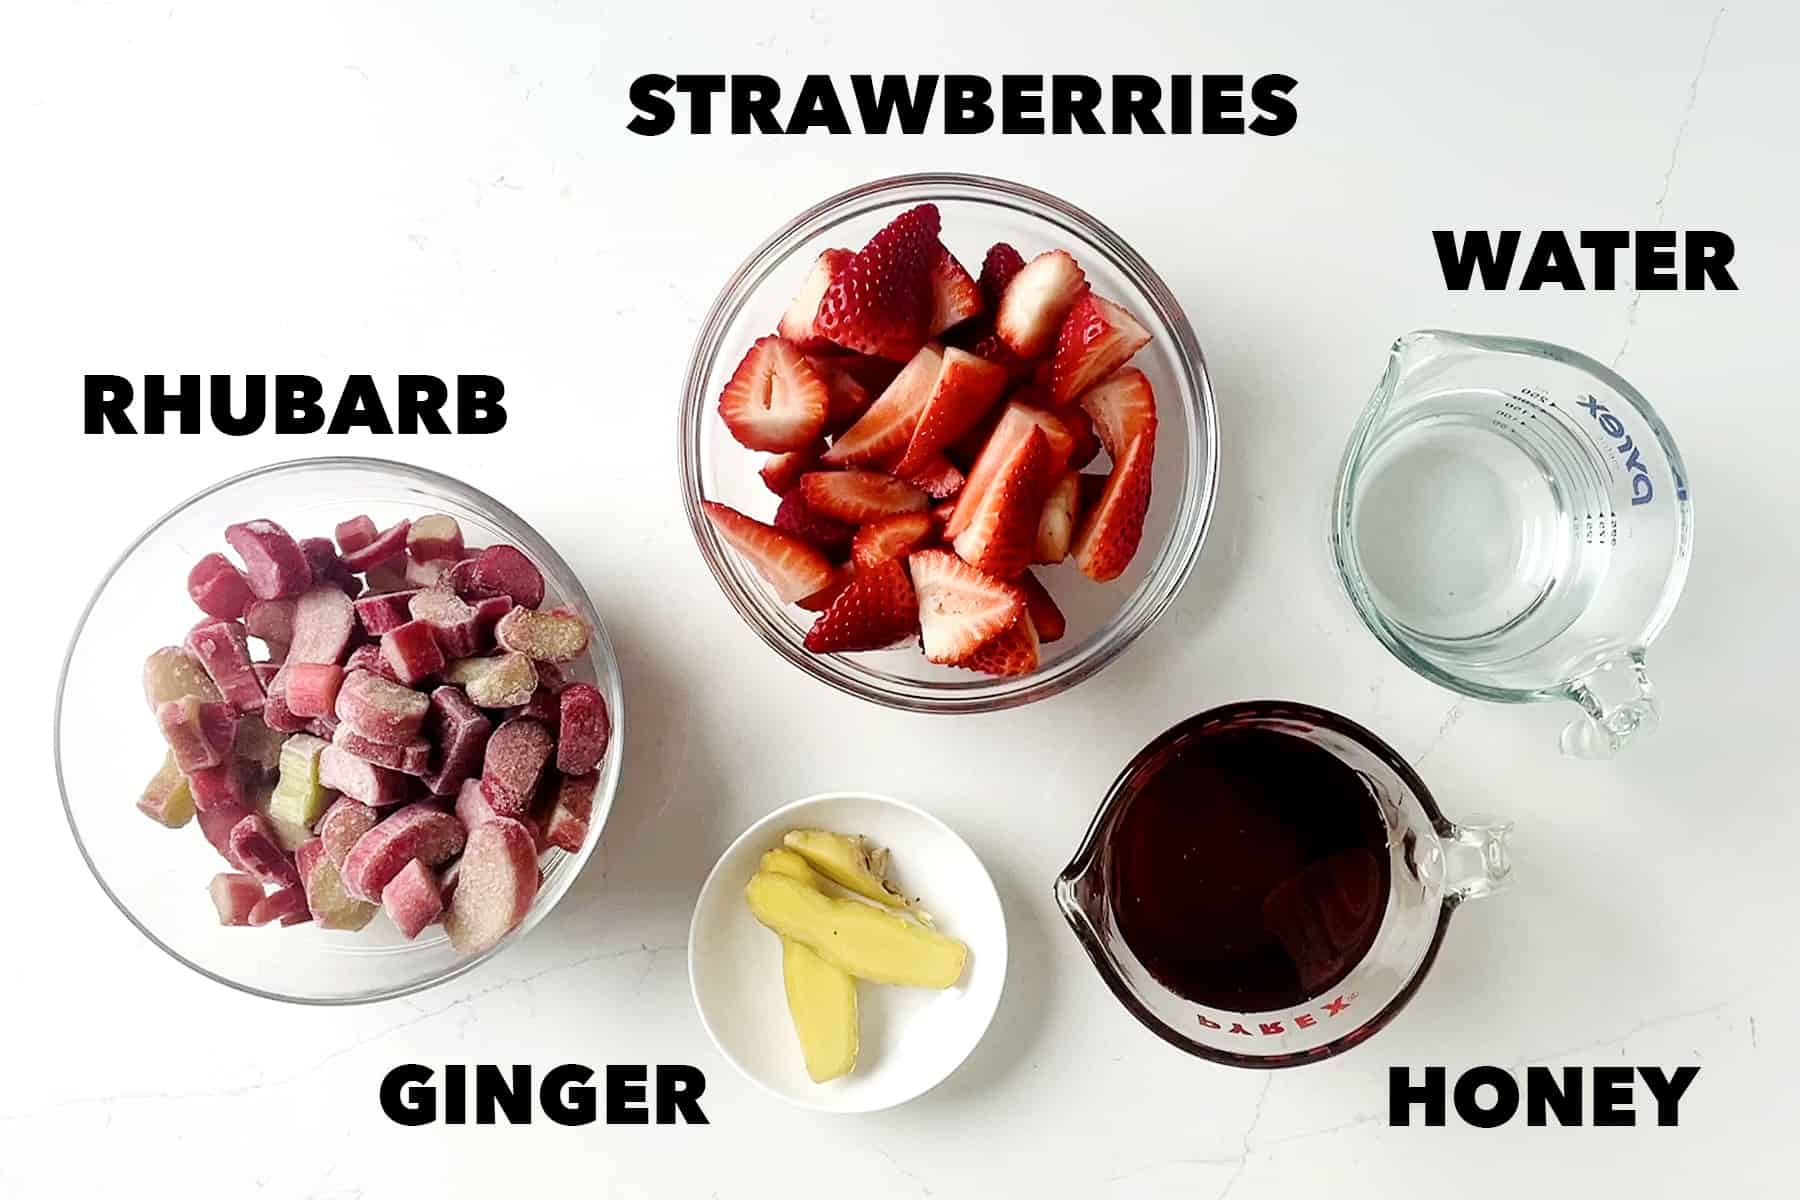 ingredients and labels for strawberry rhubarb simple syrup